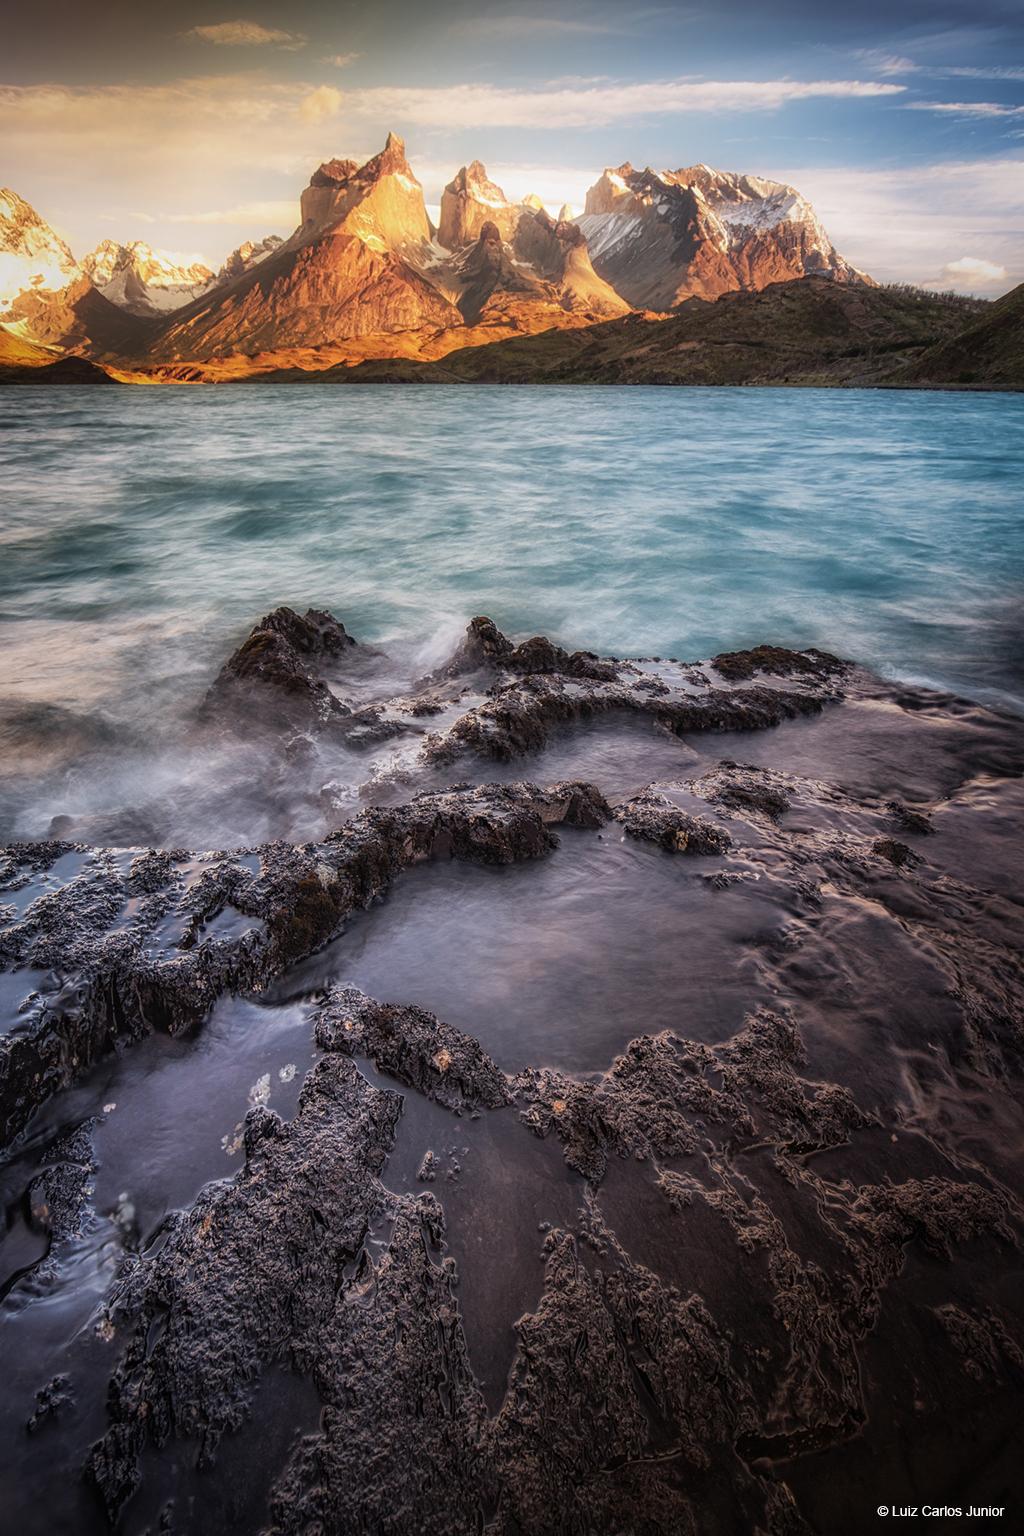 Today’s Photo Of The Day is “Torres by Dawn” by Luiz Carlos Junior. Location: Torres del Paine National Park, Chile.